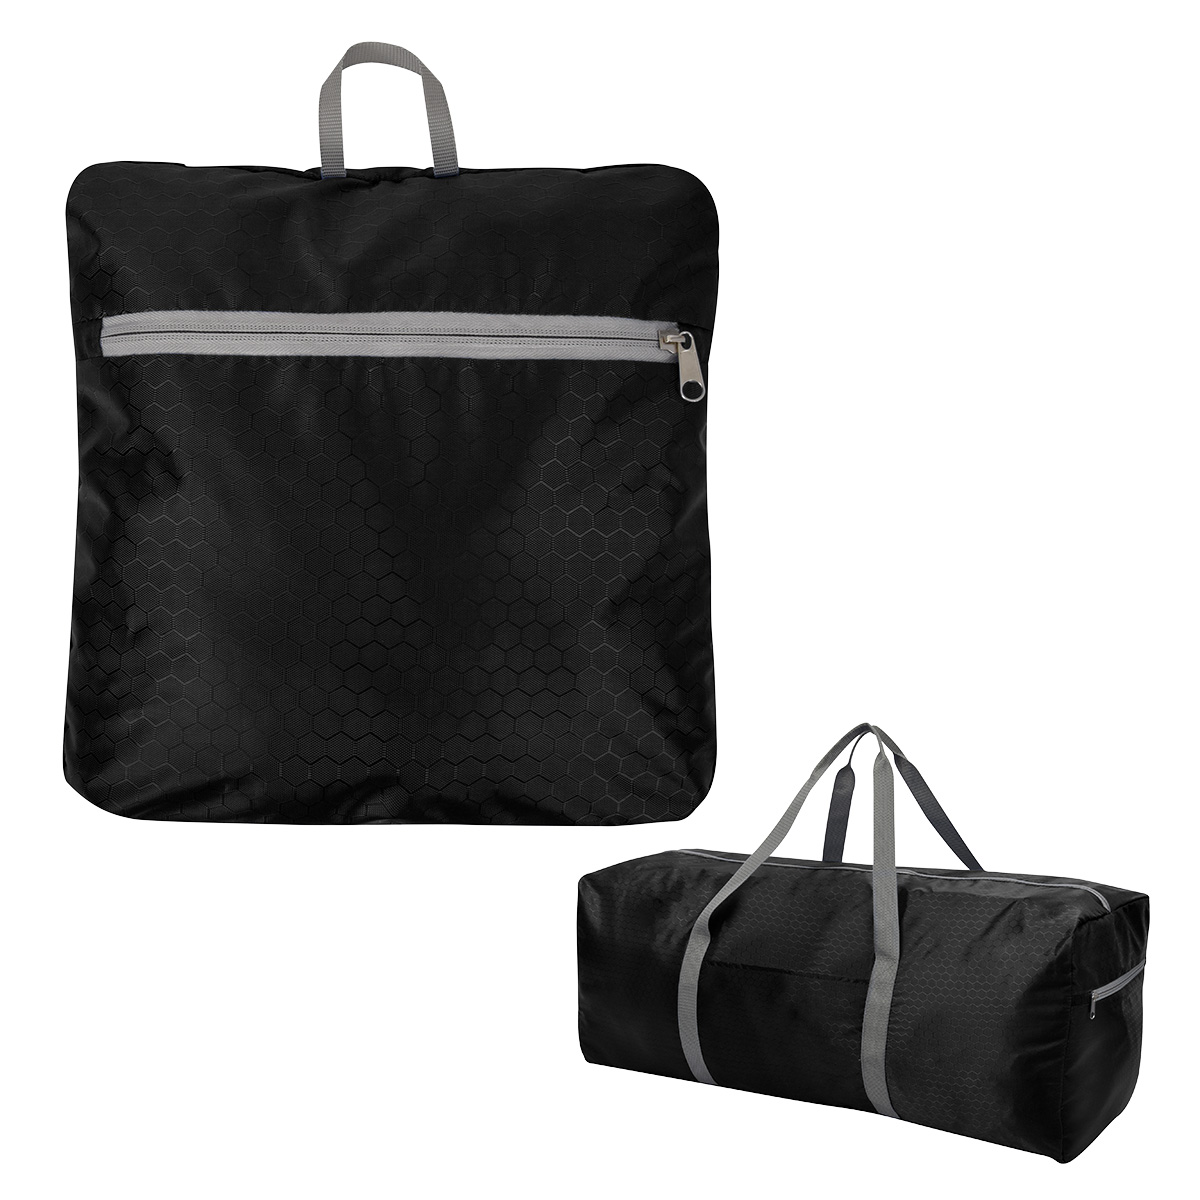 Printed Frequent Flyer Foldable Duffel Bag | Bags - Queensboro